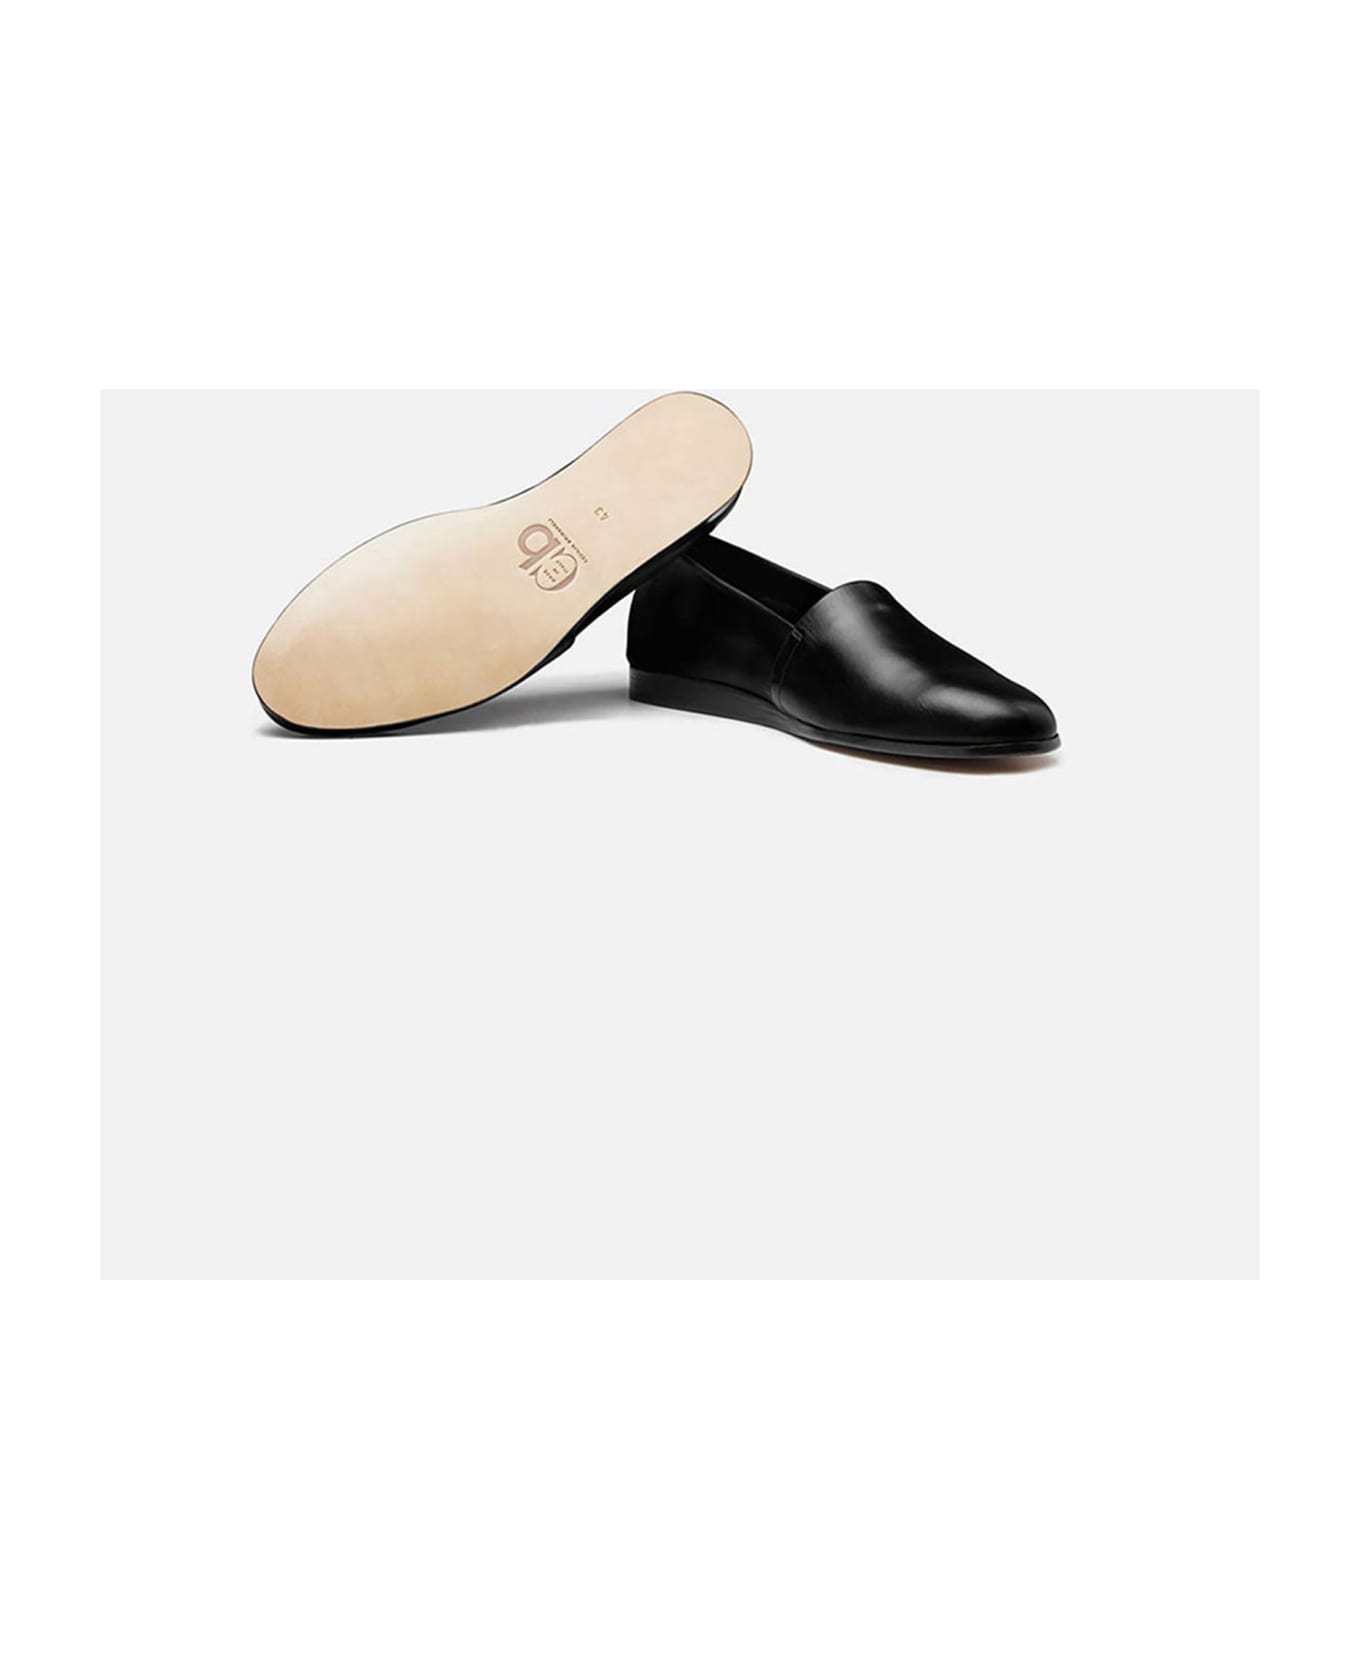 CB Made in Italy Leather Slip-on Amalfi - Black